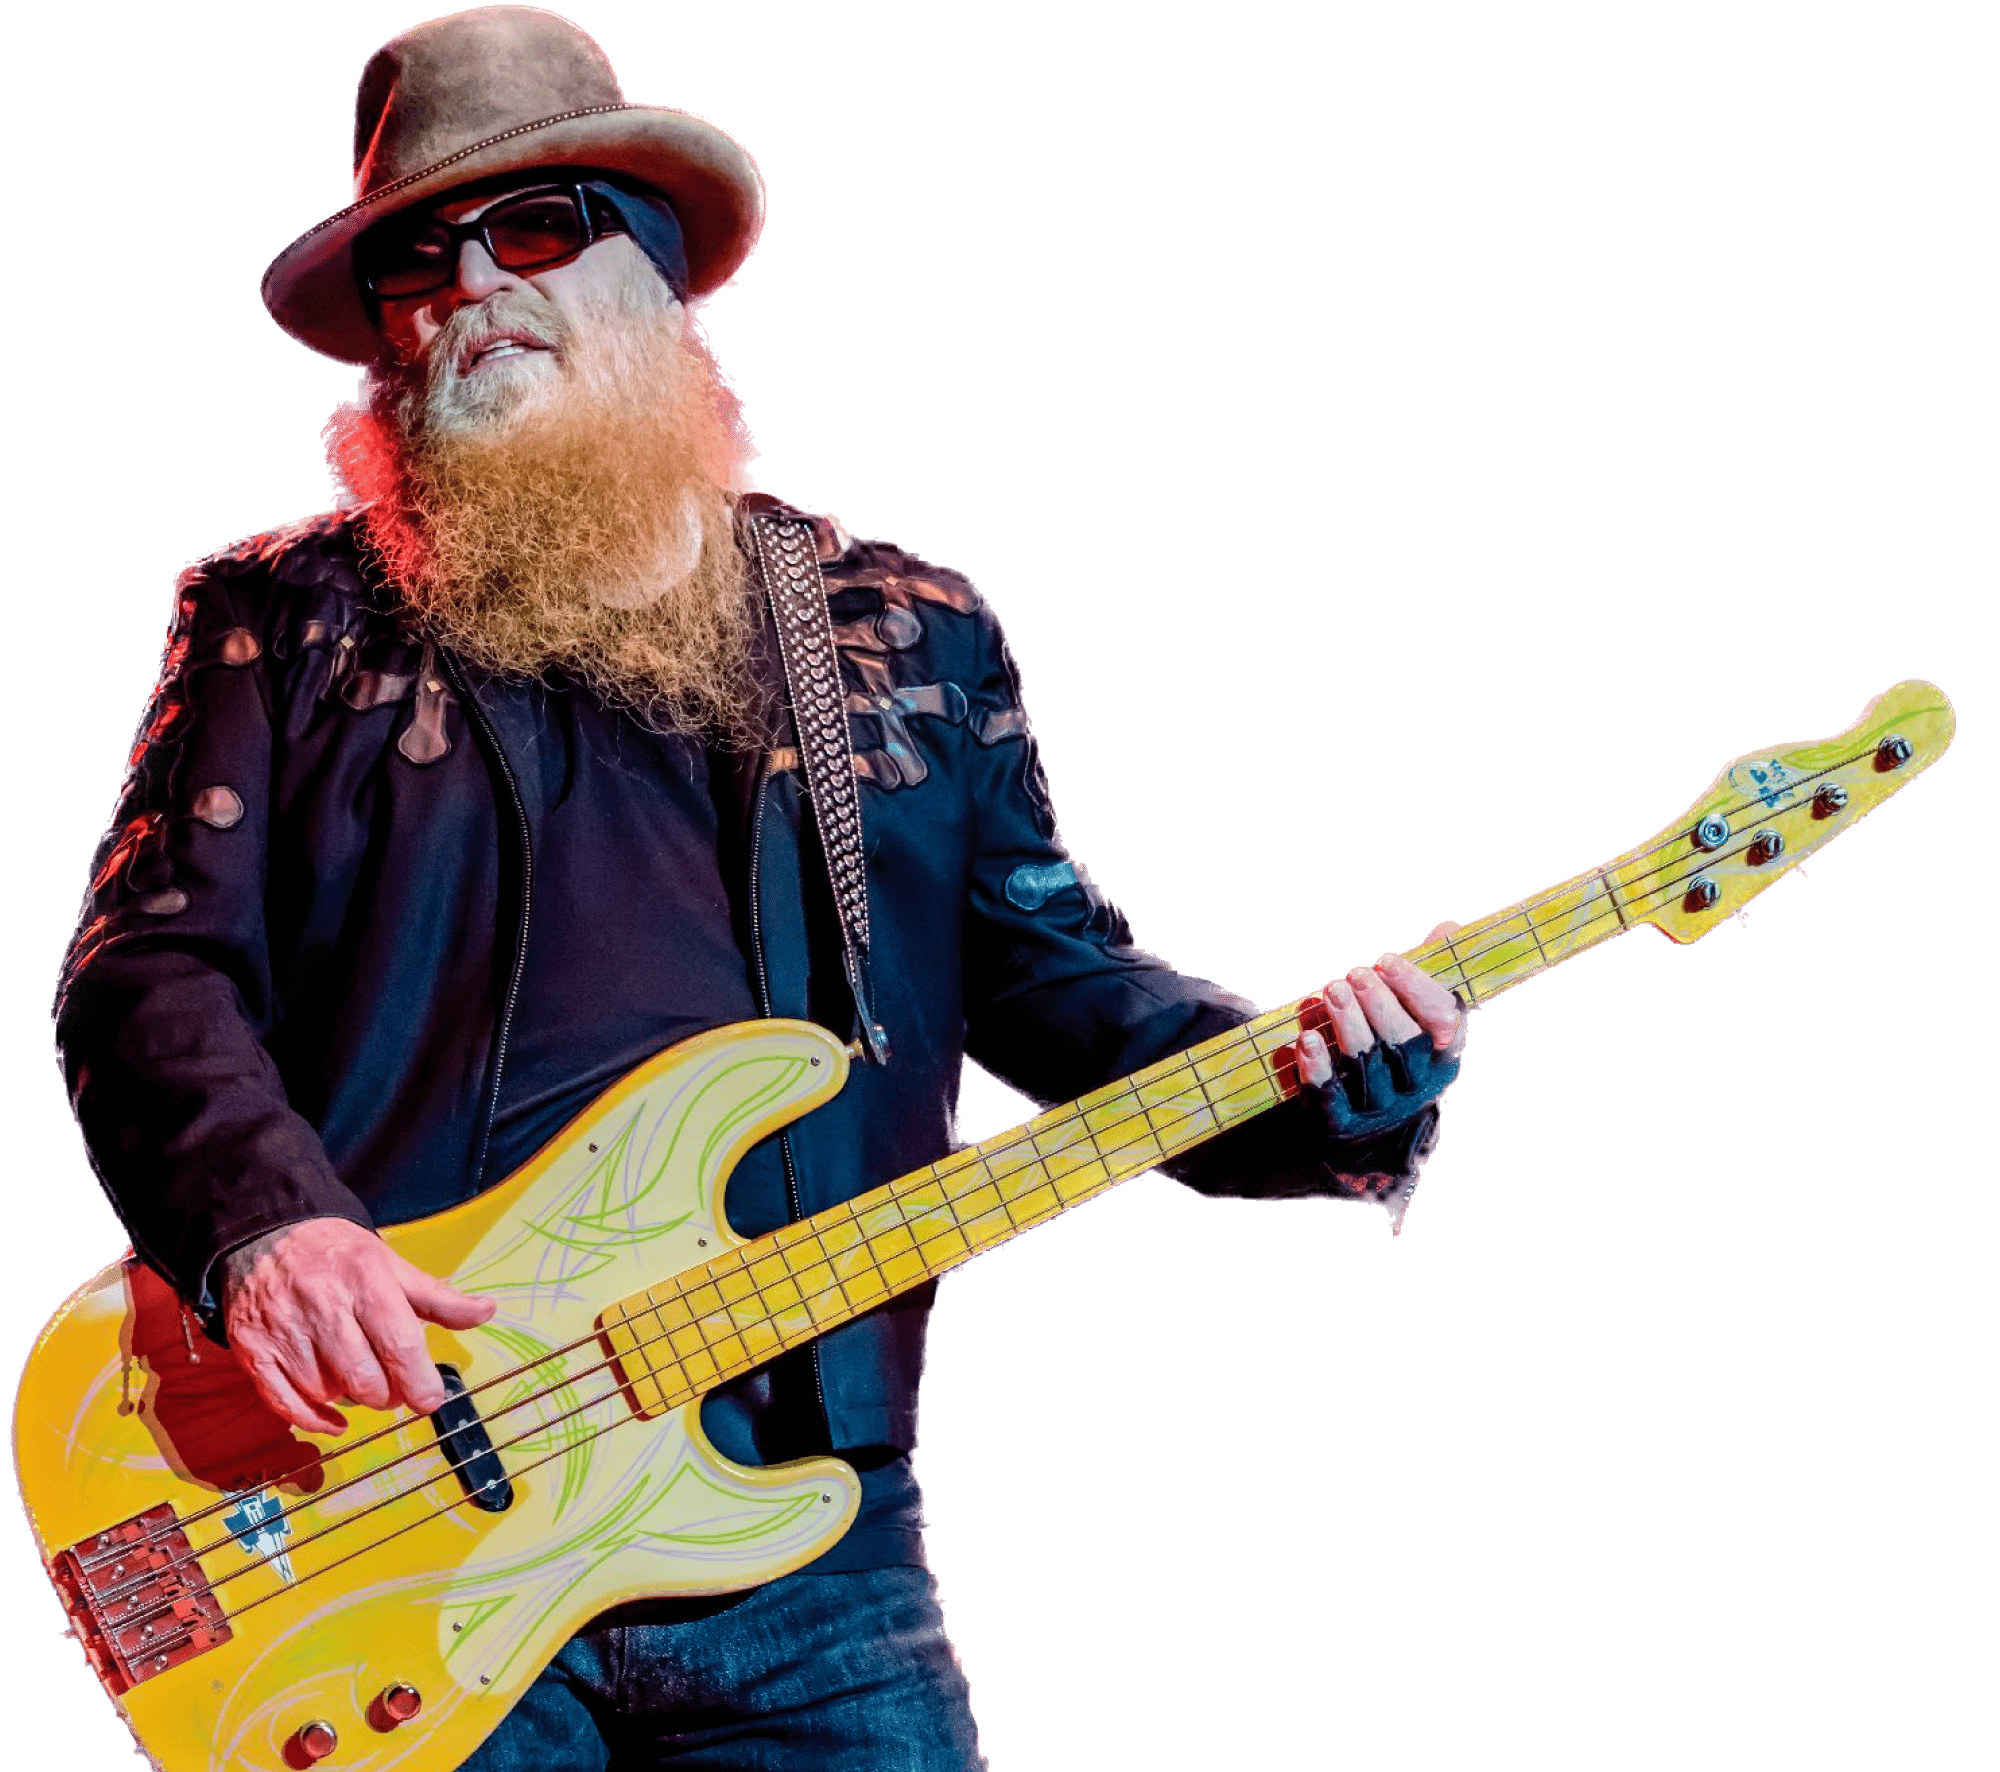 Dusty Hill of ZZ Top playing a yellow bass guitar with green and silver scrolling details